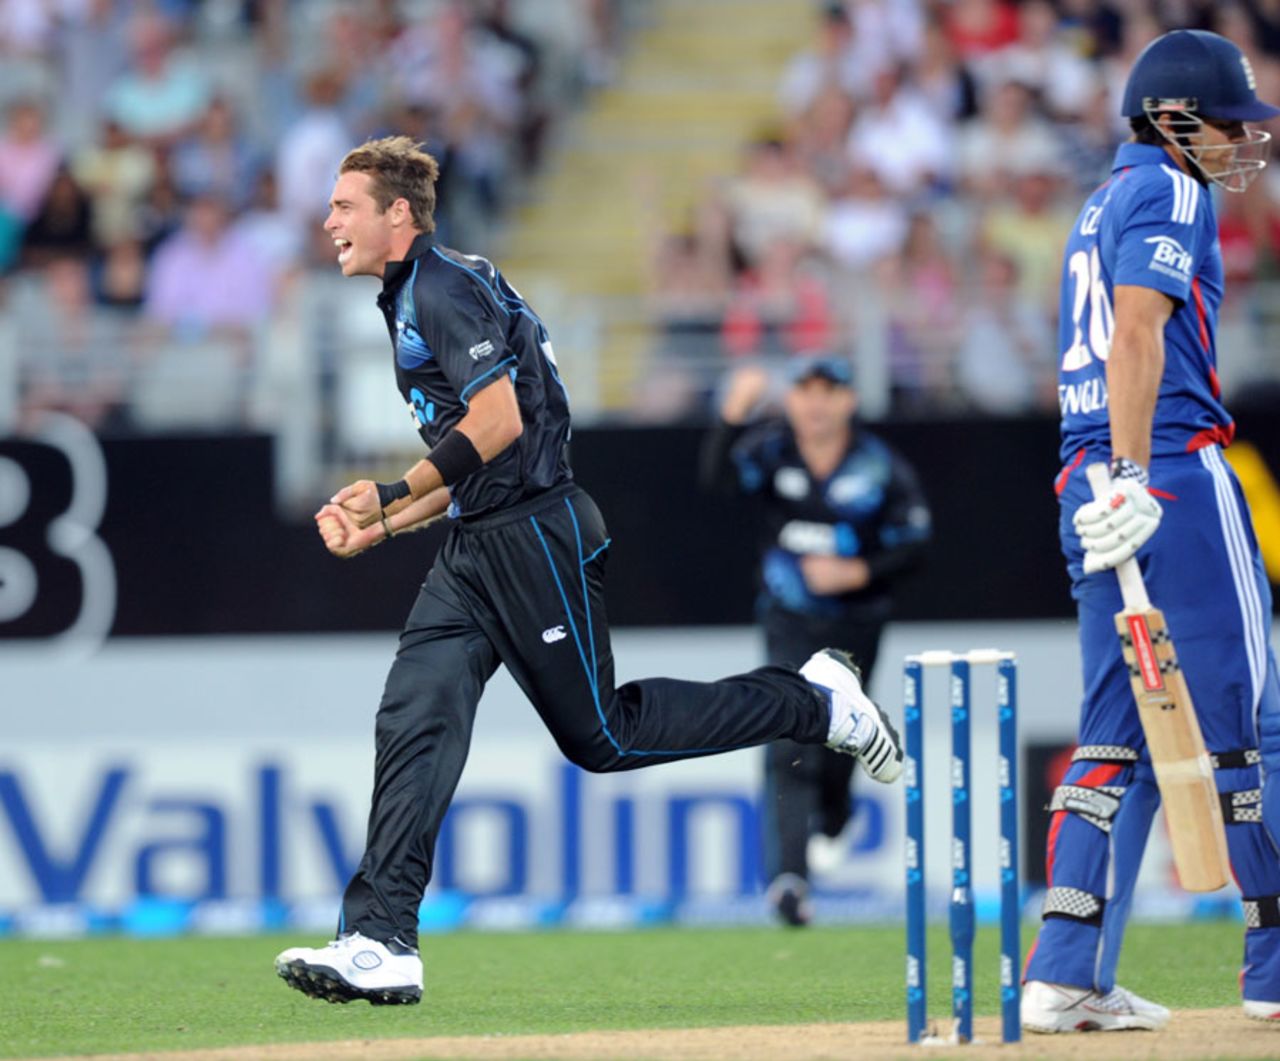 Tim Southee celebrates after removing Alastair Cook, New Zealand v England, 3rd ODI, Auckland, February 23, 2013